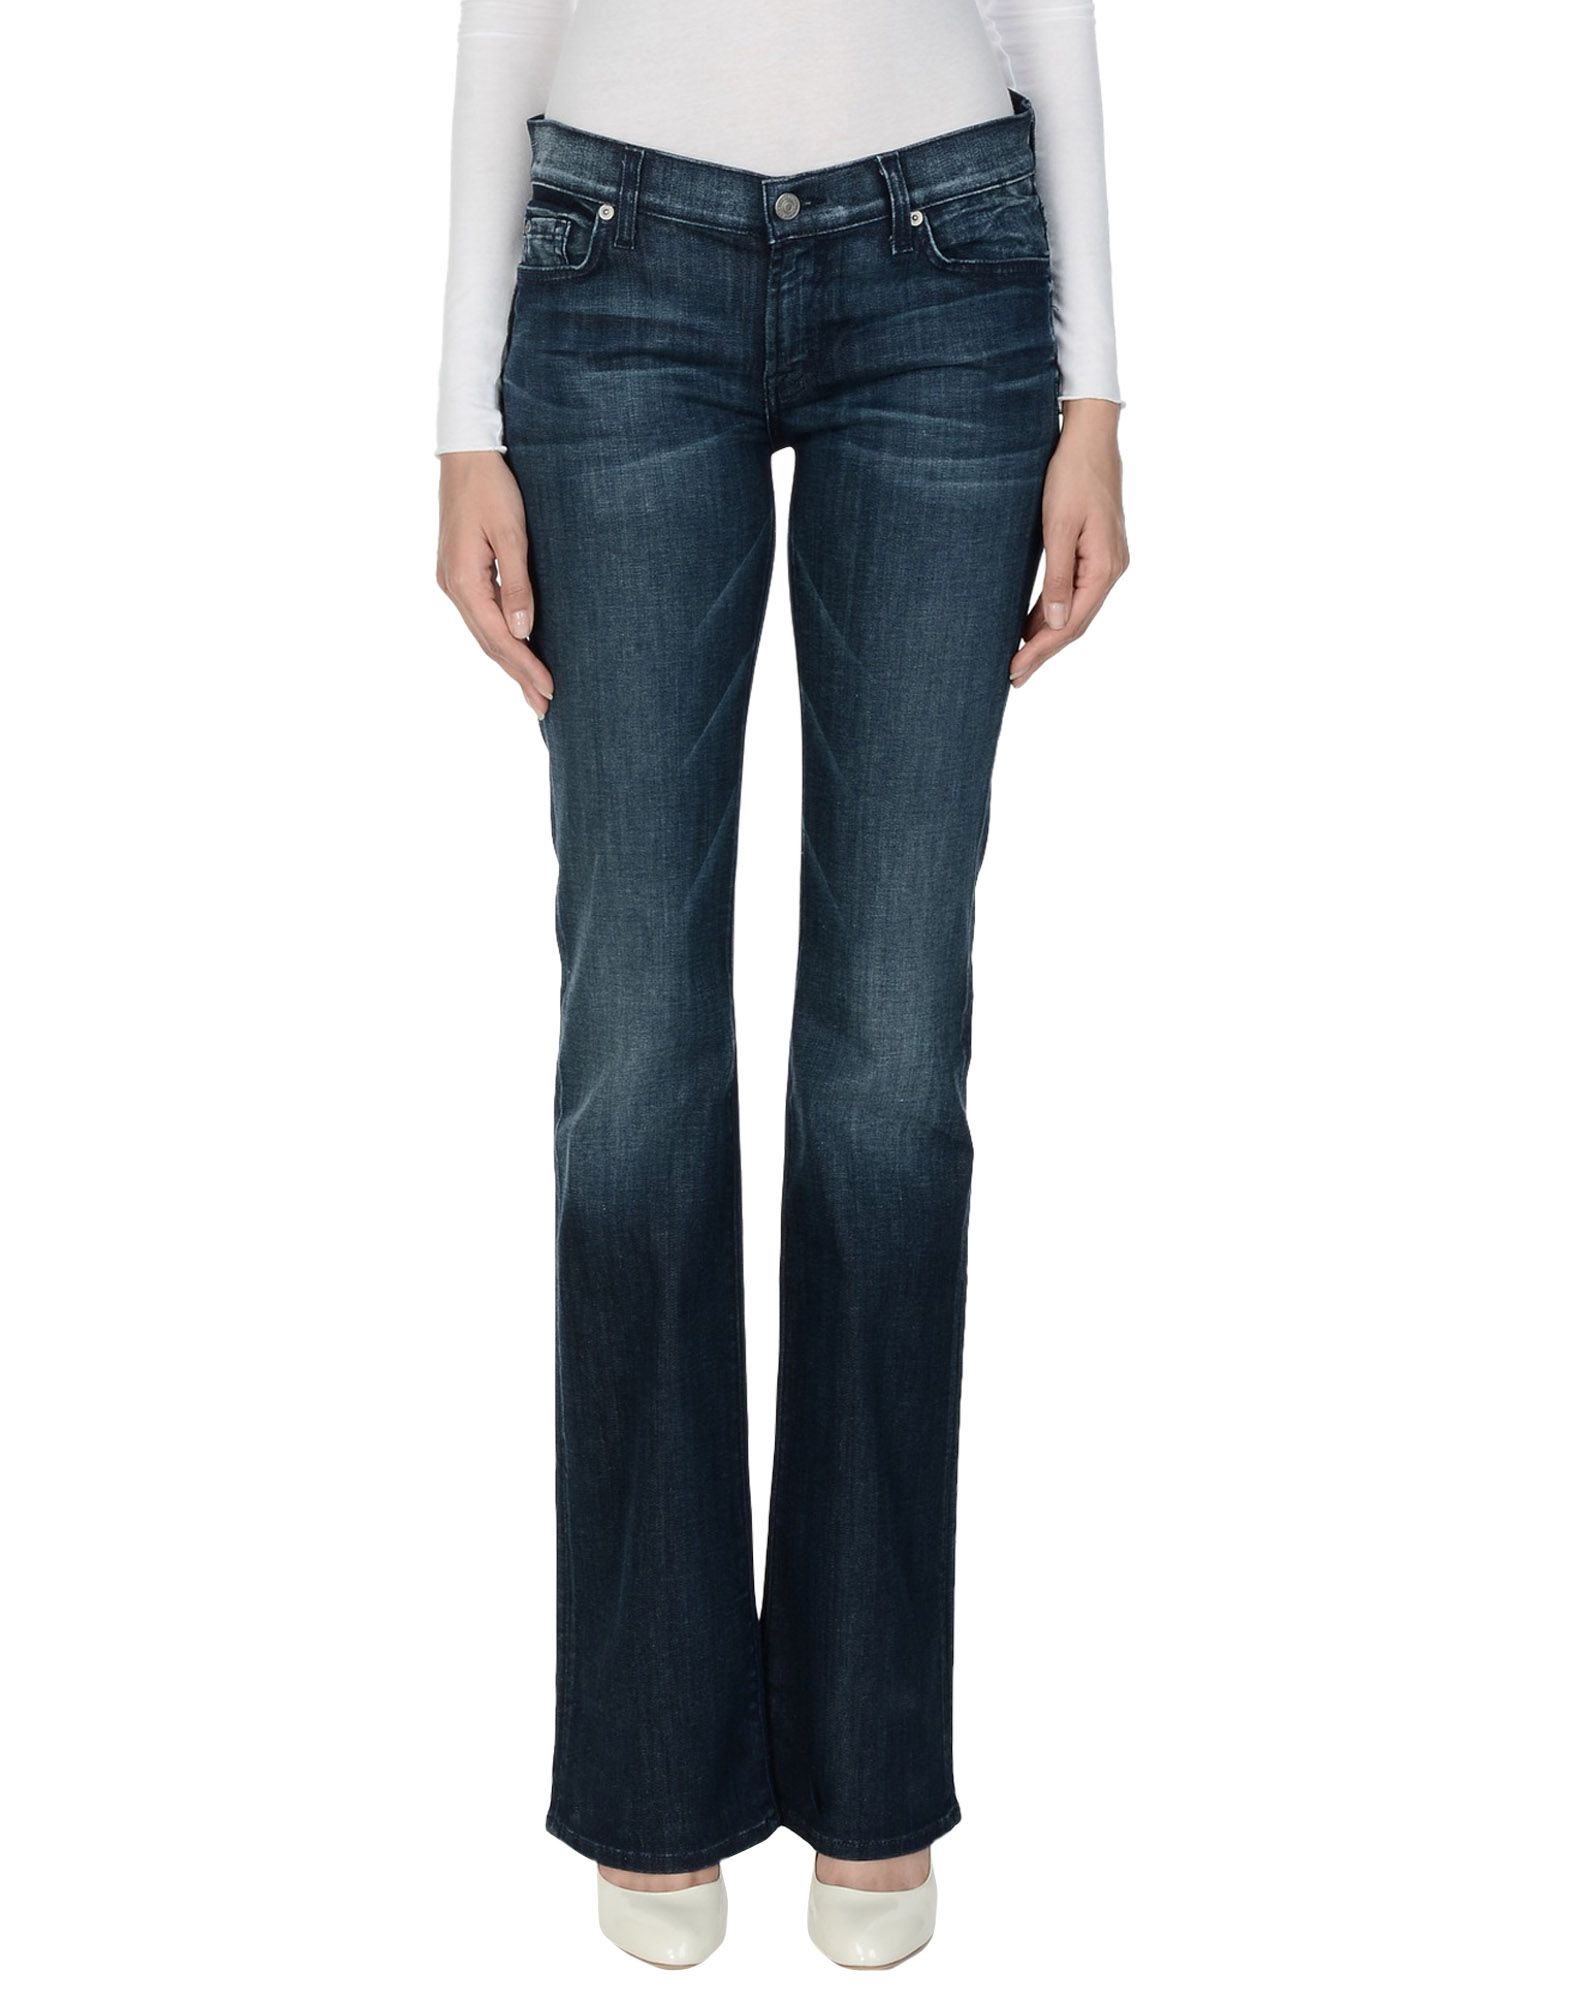 7 FOR ALL MANKIND Denim trousers,42677487ML 7